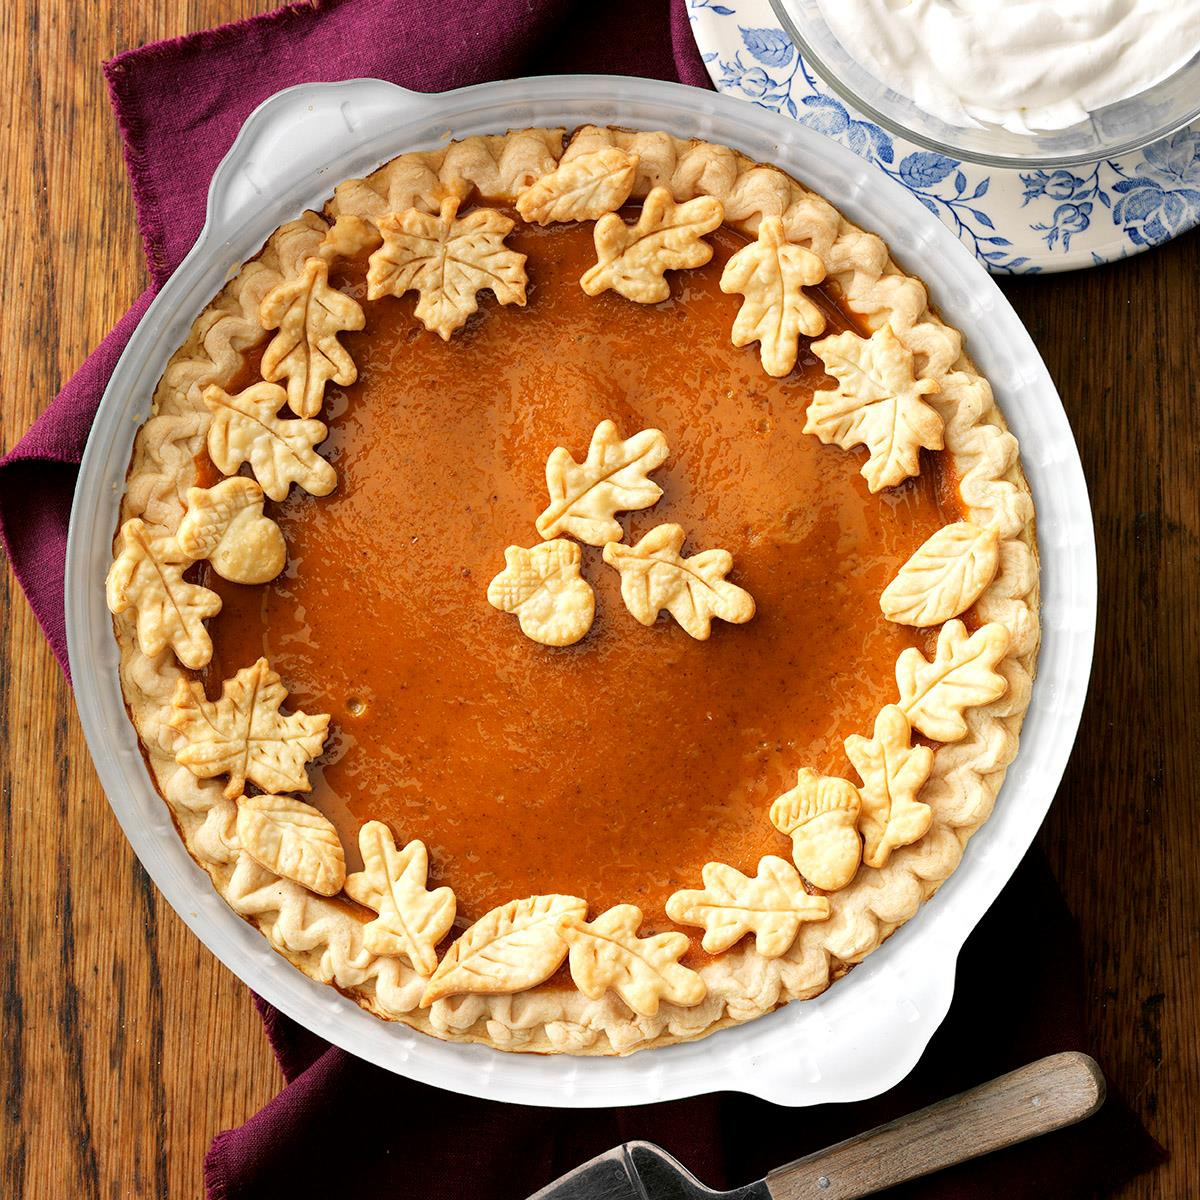 Best Thanksgiving Pies
 25 Pumpkin Pie Recipes to Try This Year